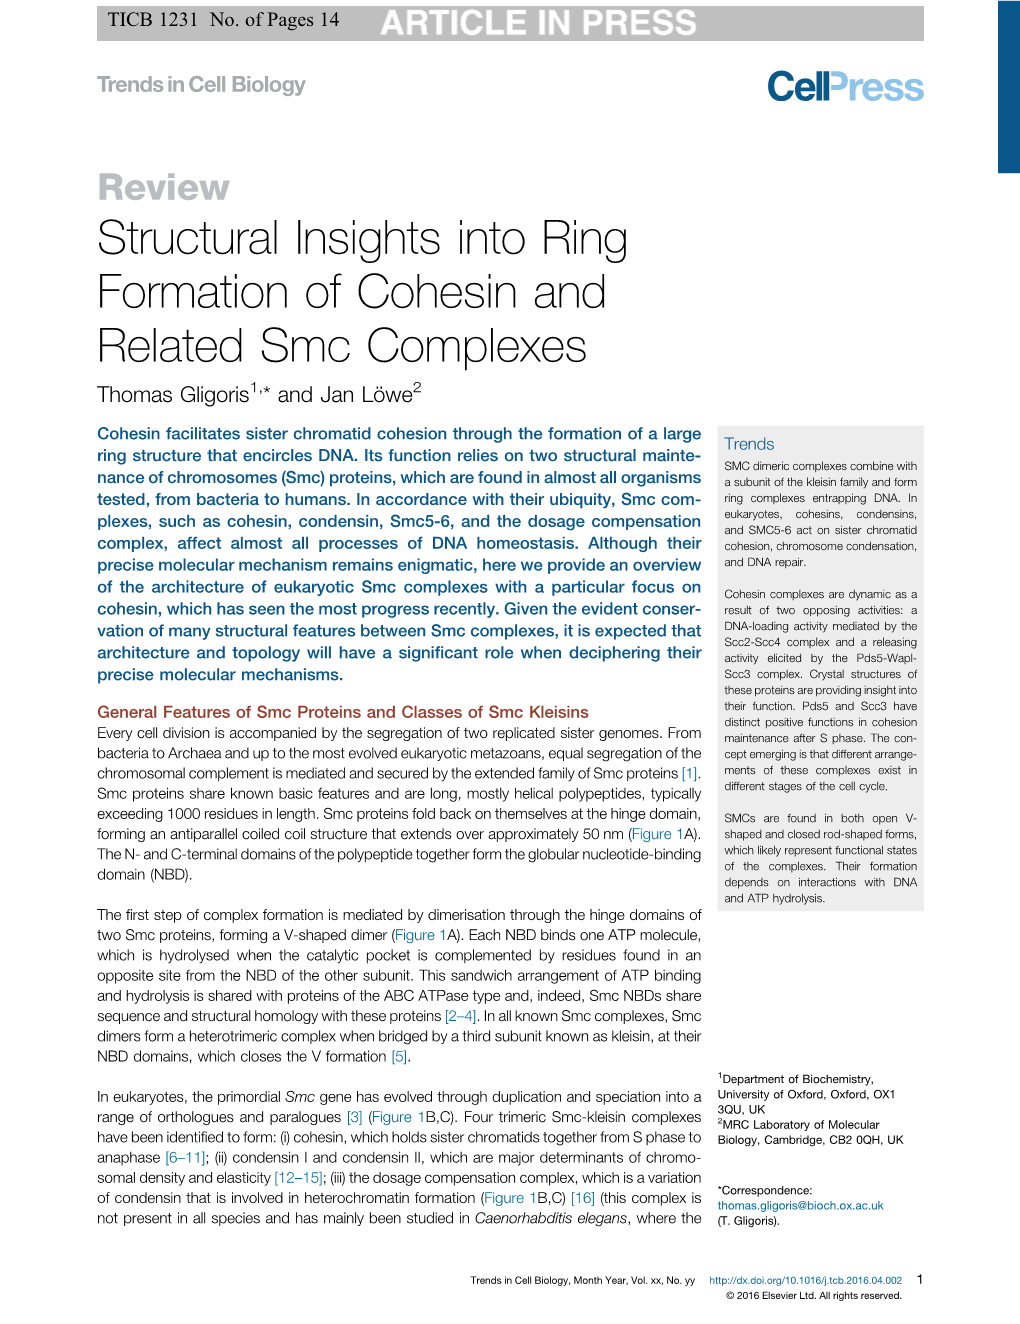 Structural Insights Into Ring Formation of Cohesin and Related Smc Complexes Thomas Gligoris1,* and Jan Löwe2